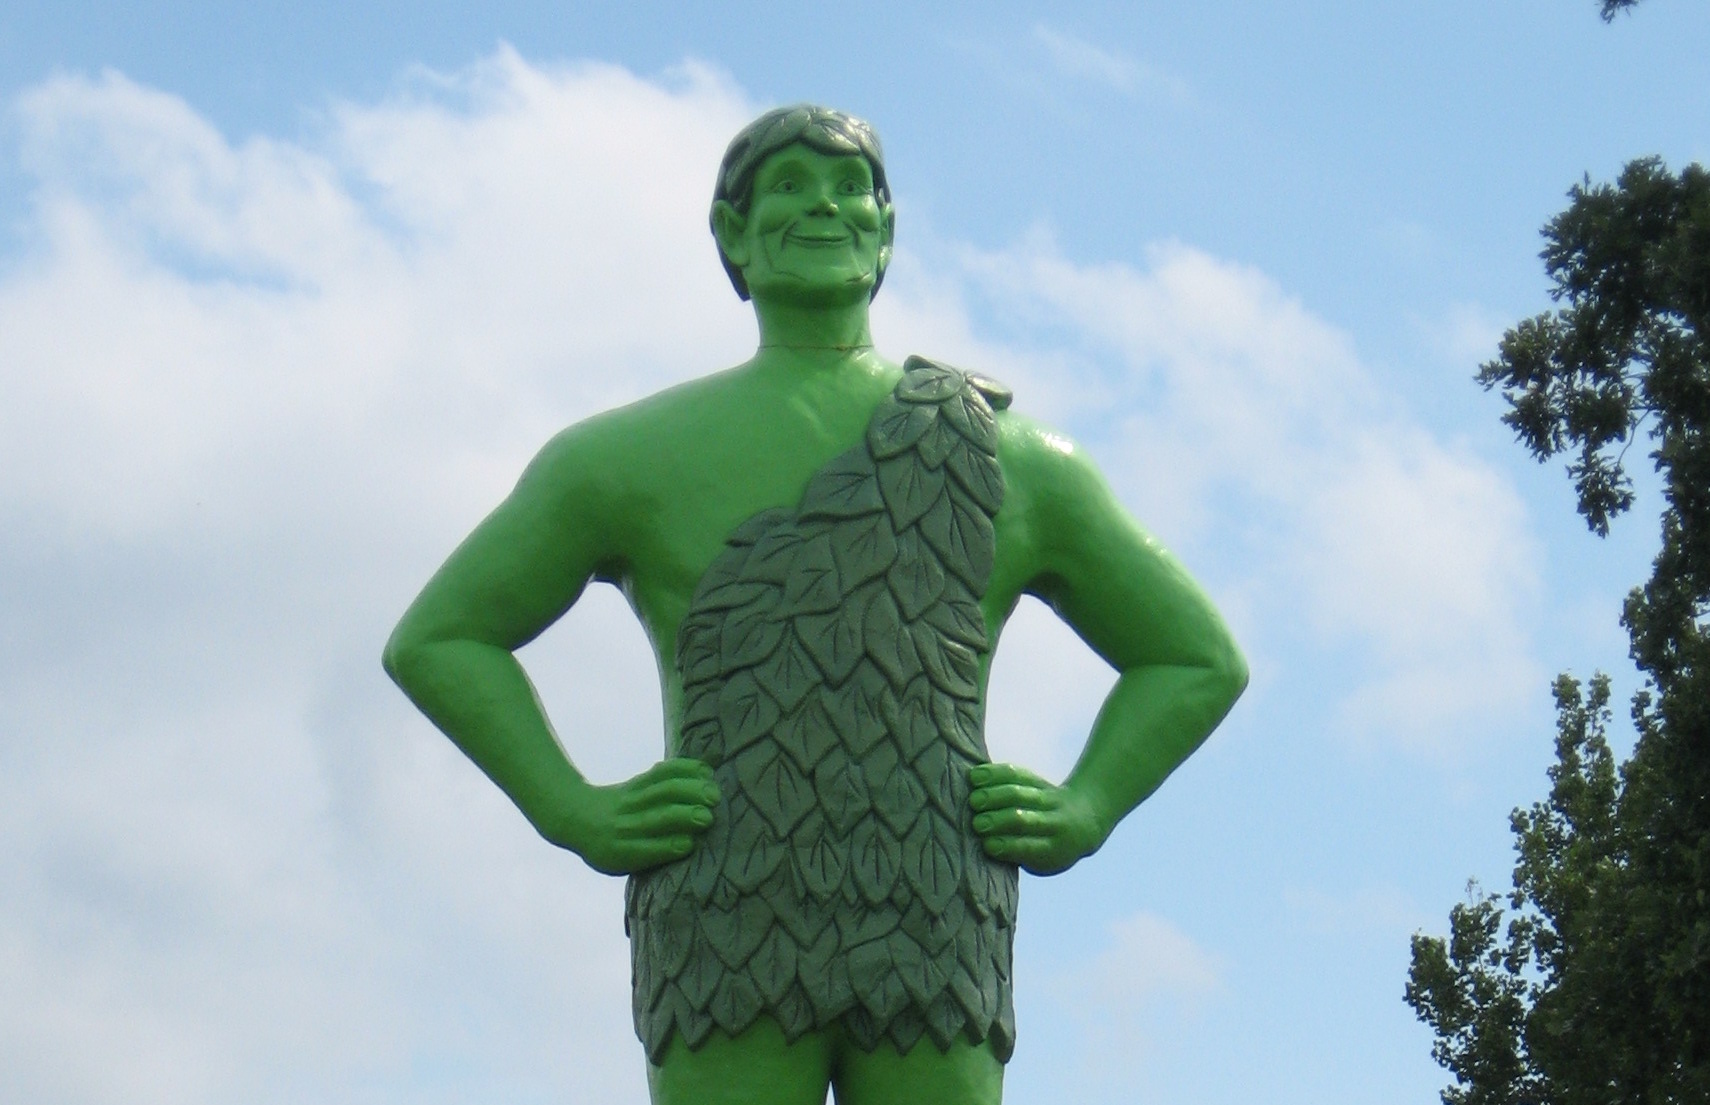 What Ever Happened to the Jolly Green Giant, and Other Iconic Spokescreatures?